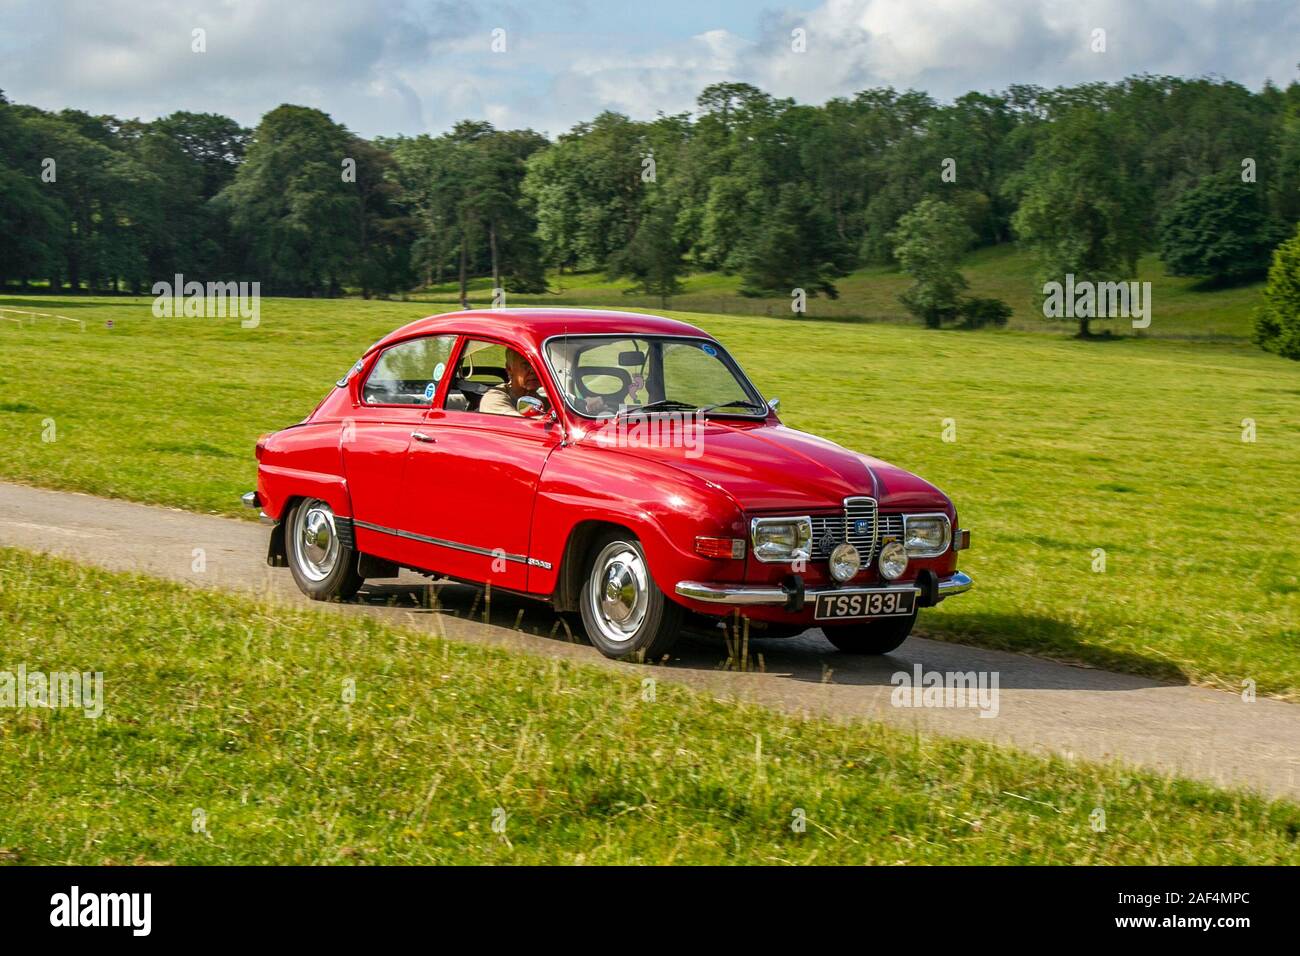 1972 70s red SAAB Classic cars, historics, cherished, old timers, collectable restored vintage veteran, vehicles of yesteryear arriving for the Mark Woodward historical motoring event at Leighton Hall, Carnforth, UK Stock Photo